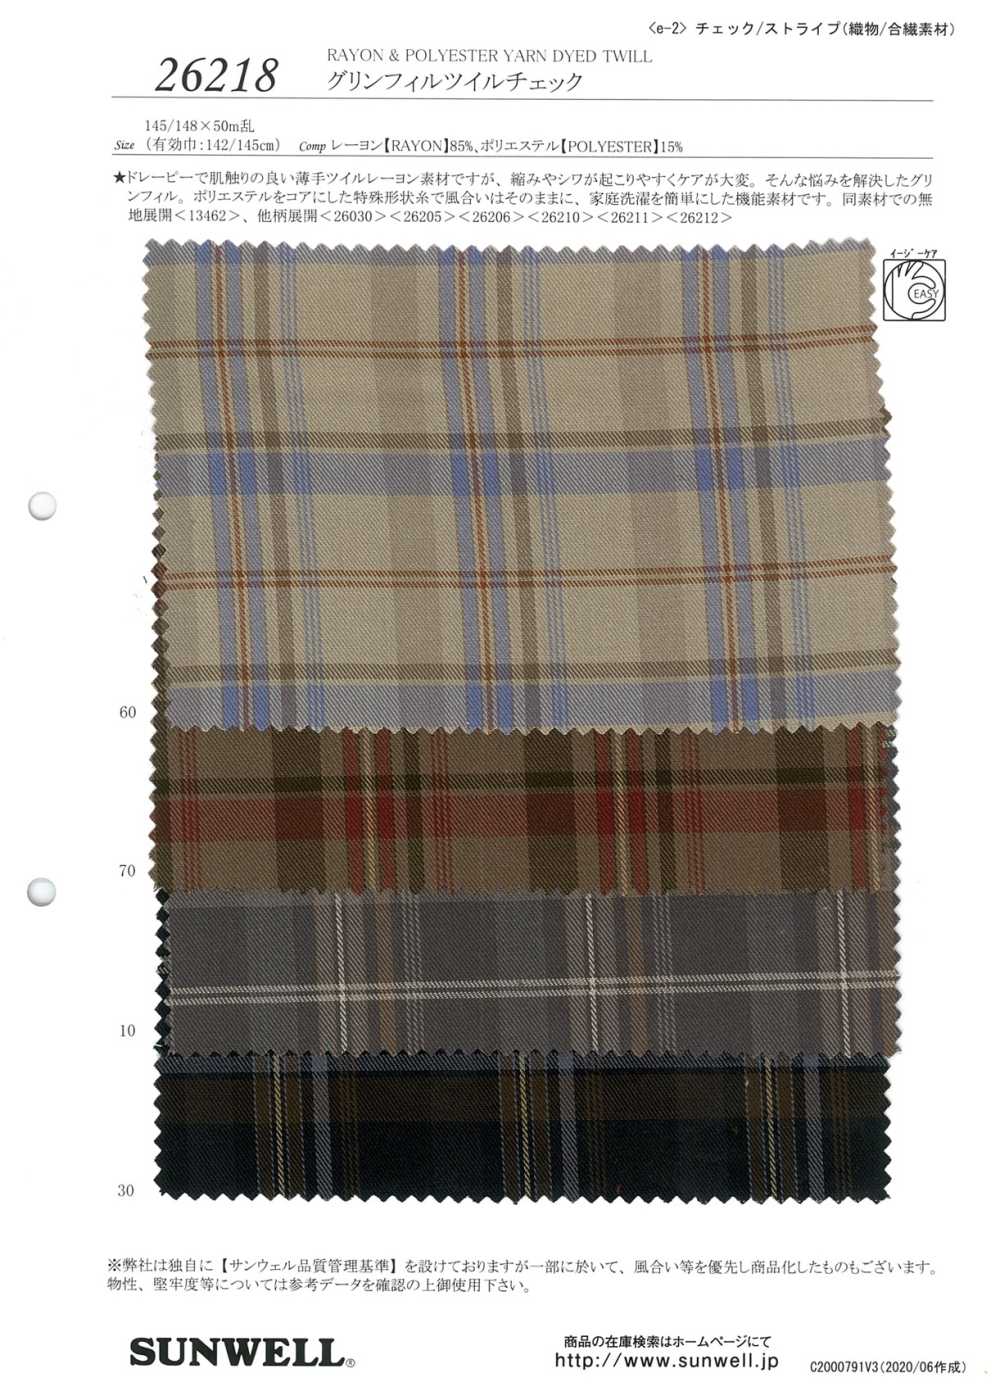 26218 [OUTLET] GrinFil Twill Check[Textile / Fabric] SUNWELL